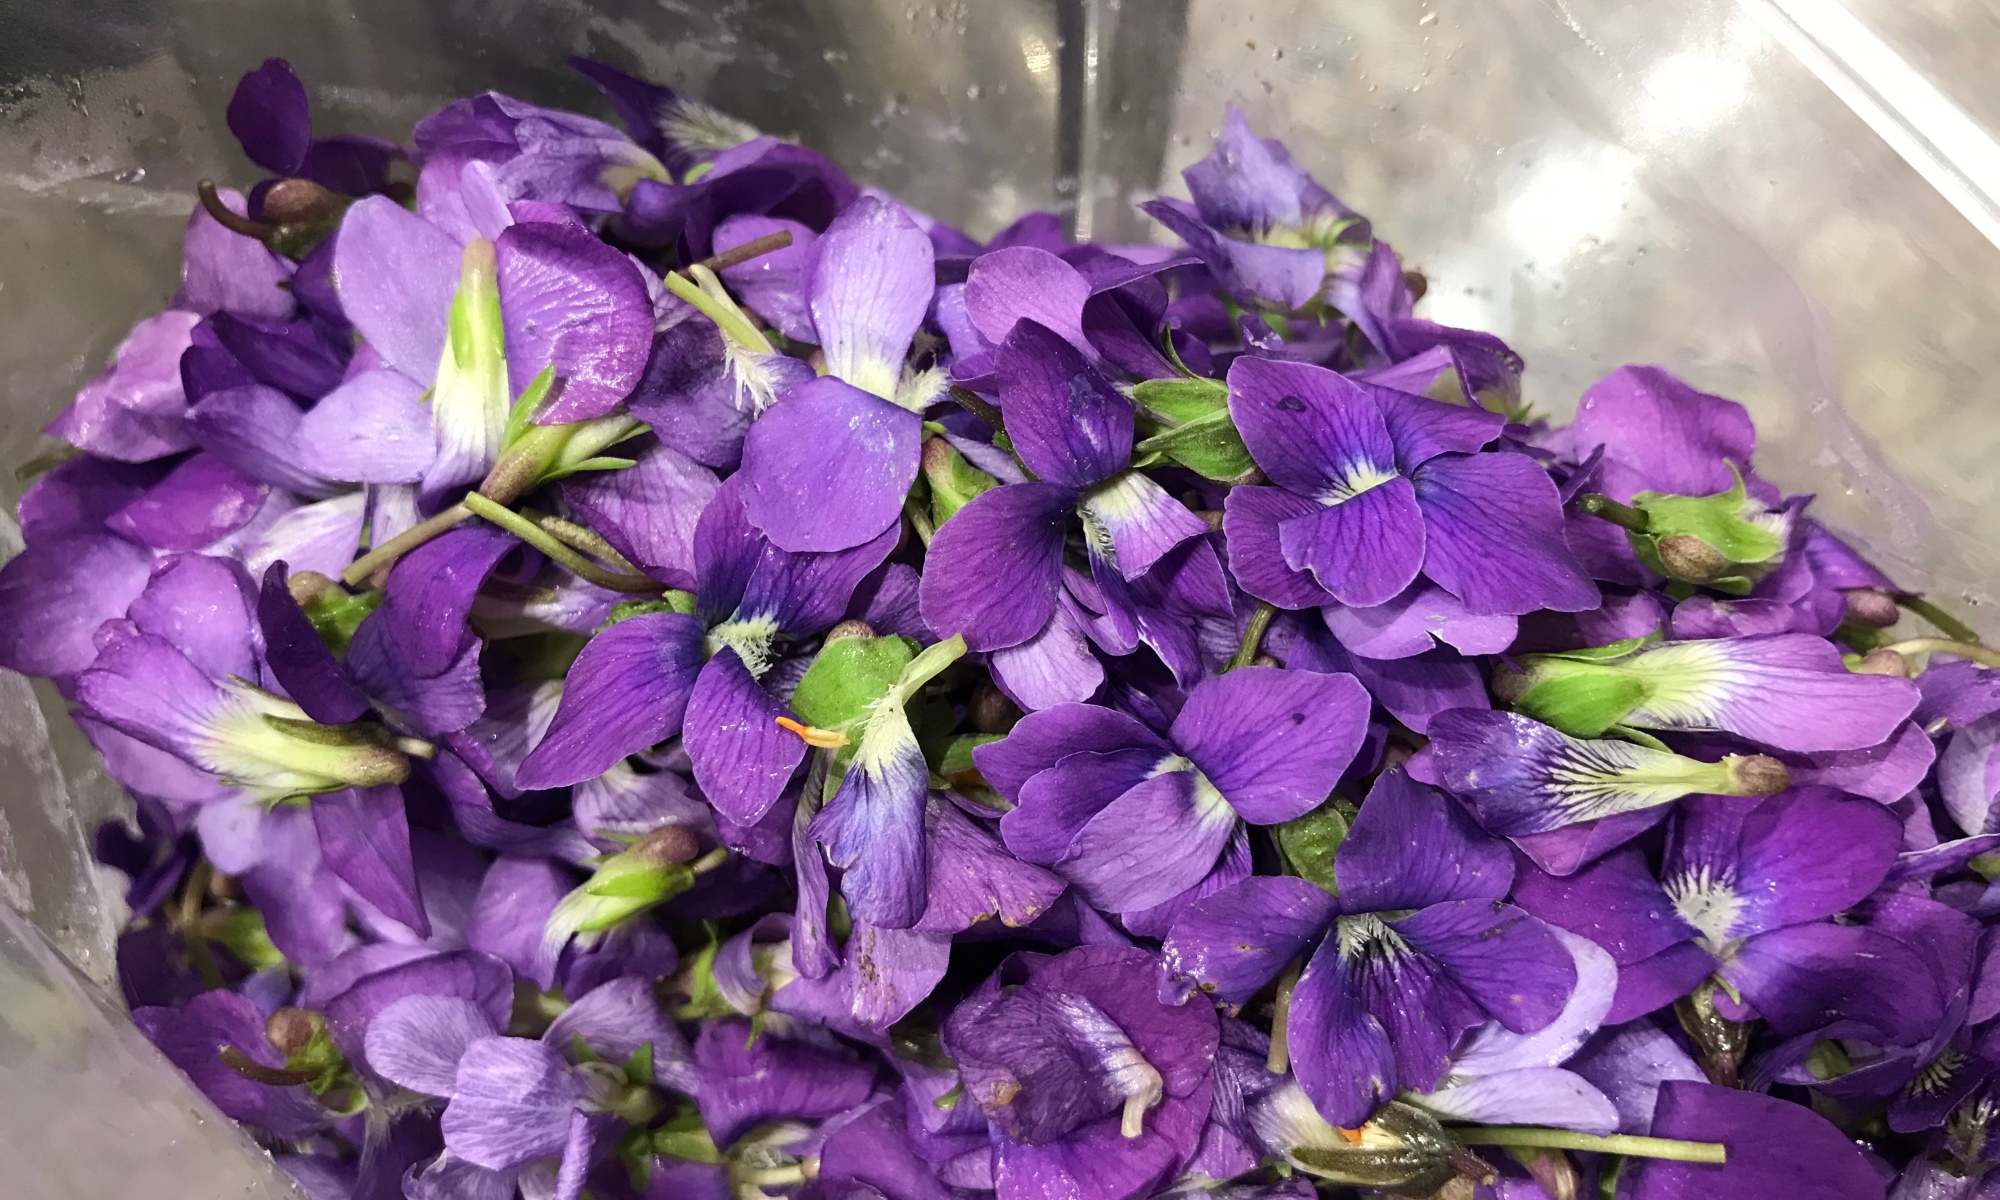 a plastic bag that is about half full of freshly picked violet flowers